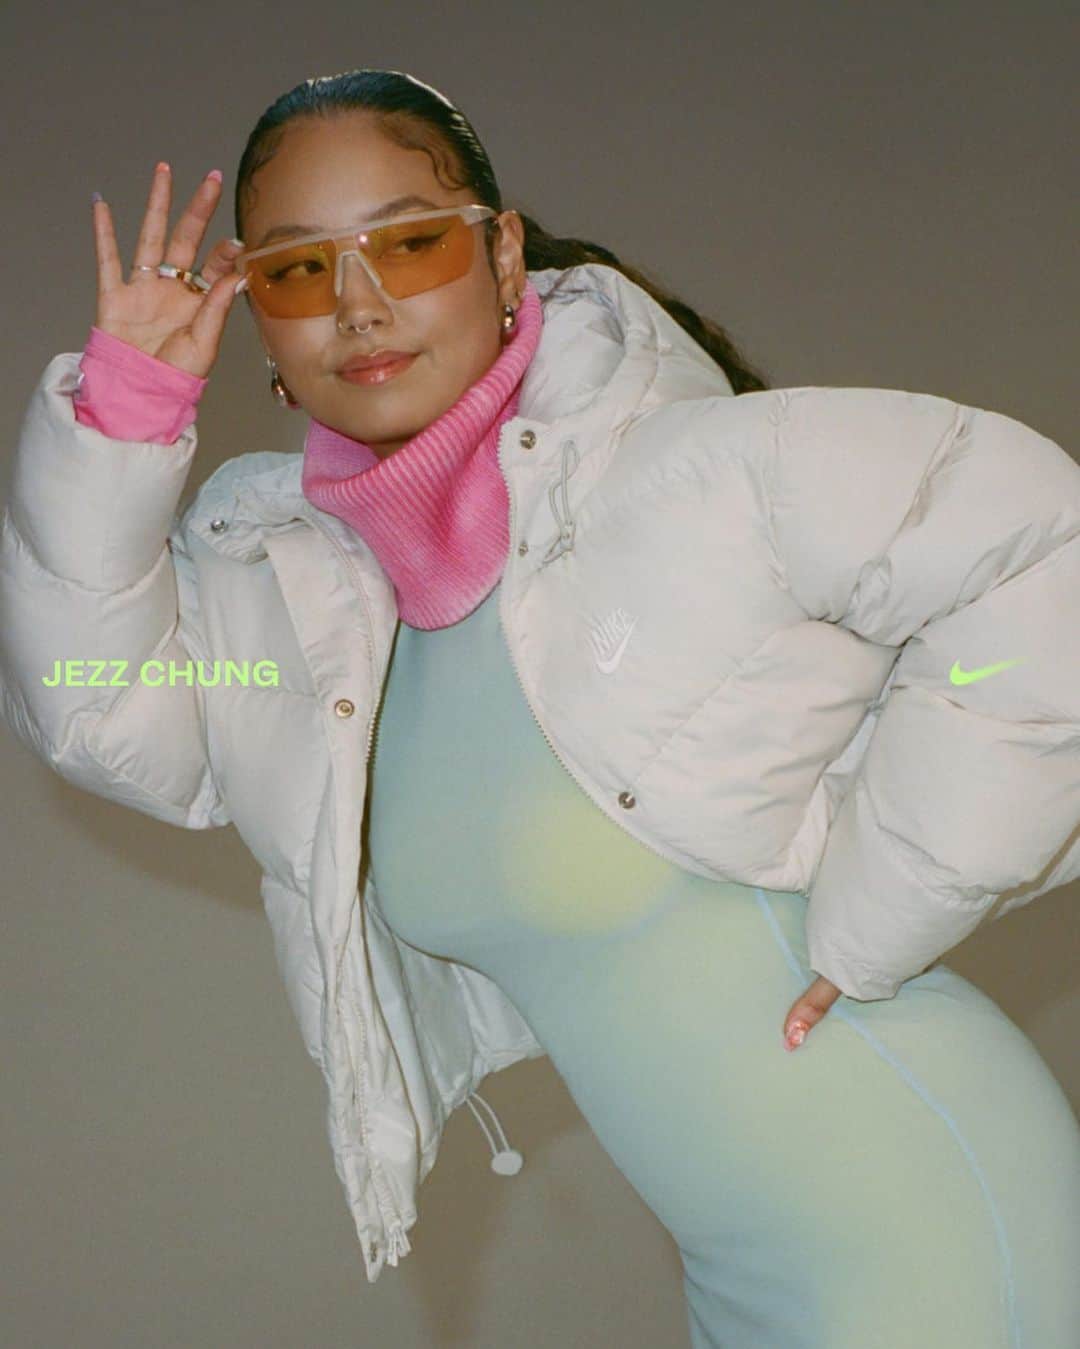 Nike Womenのインスタグラム：「Joy for Author & Performance Artist Jezz Chung (@jezzchung) is part self-care, part creative expression 💓  “Some people think beauty and style is frivolous, but it's actually such an important part of self-care and artistic expression.”  Check Jezz’s top choices for the season in our IG shop 💙」